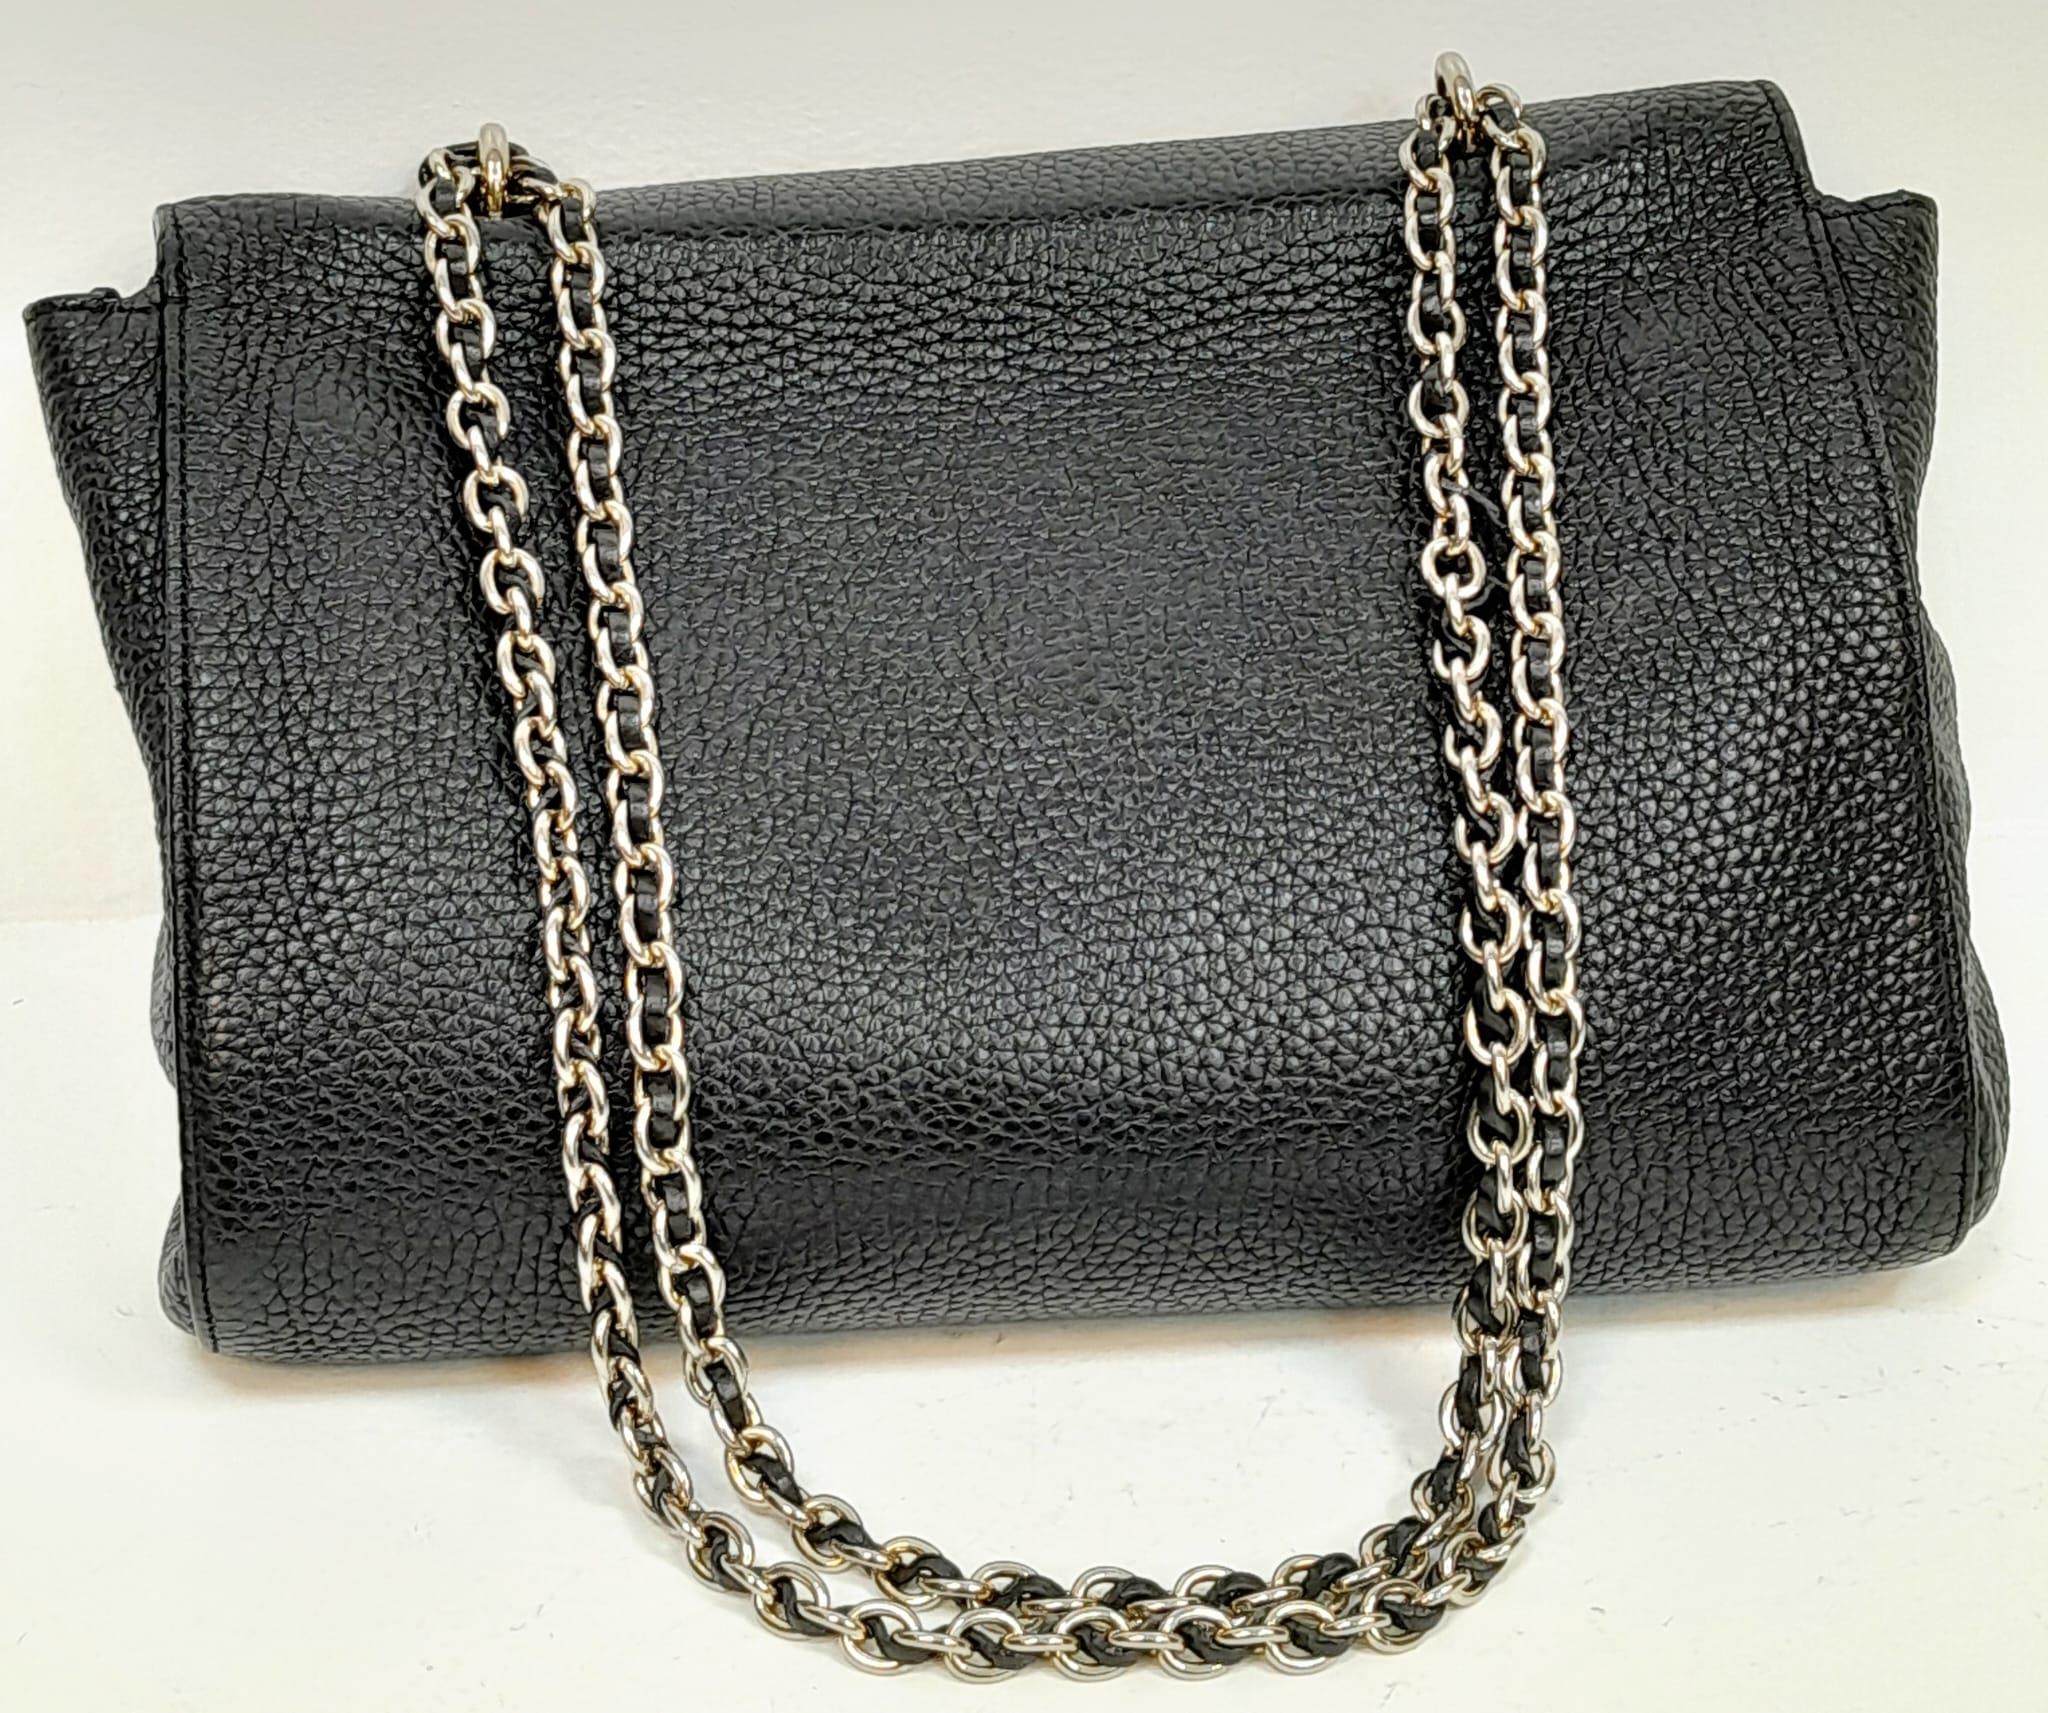 A Mulberry Black 'Lily' Bag. Leather exterior with gold-toned hardware, chain and leather strap, - Image 3 of 12